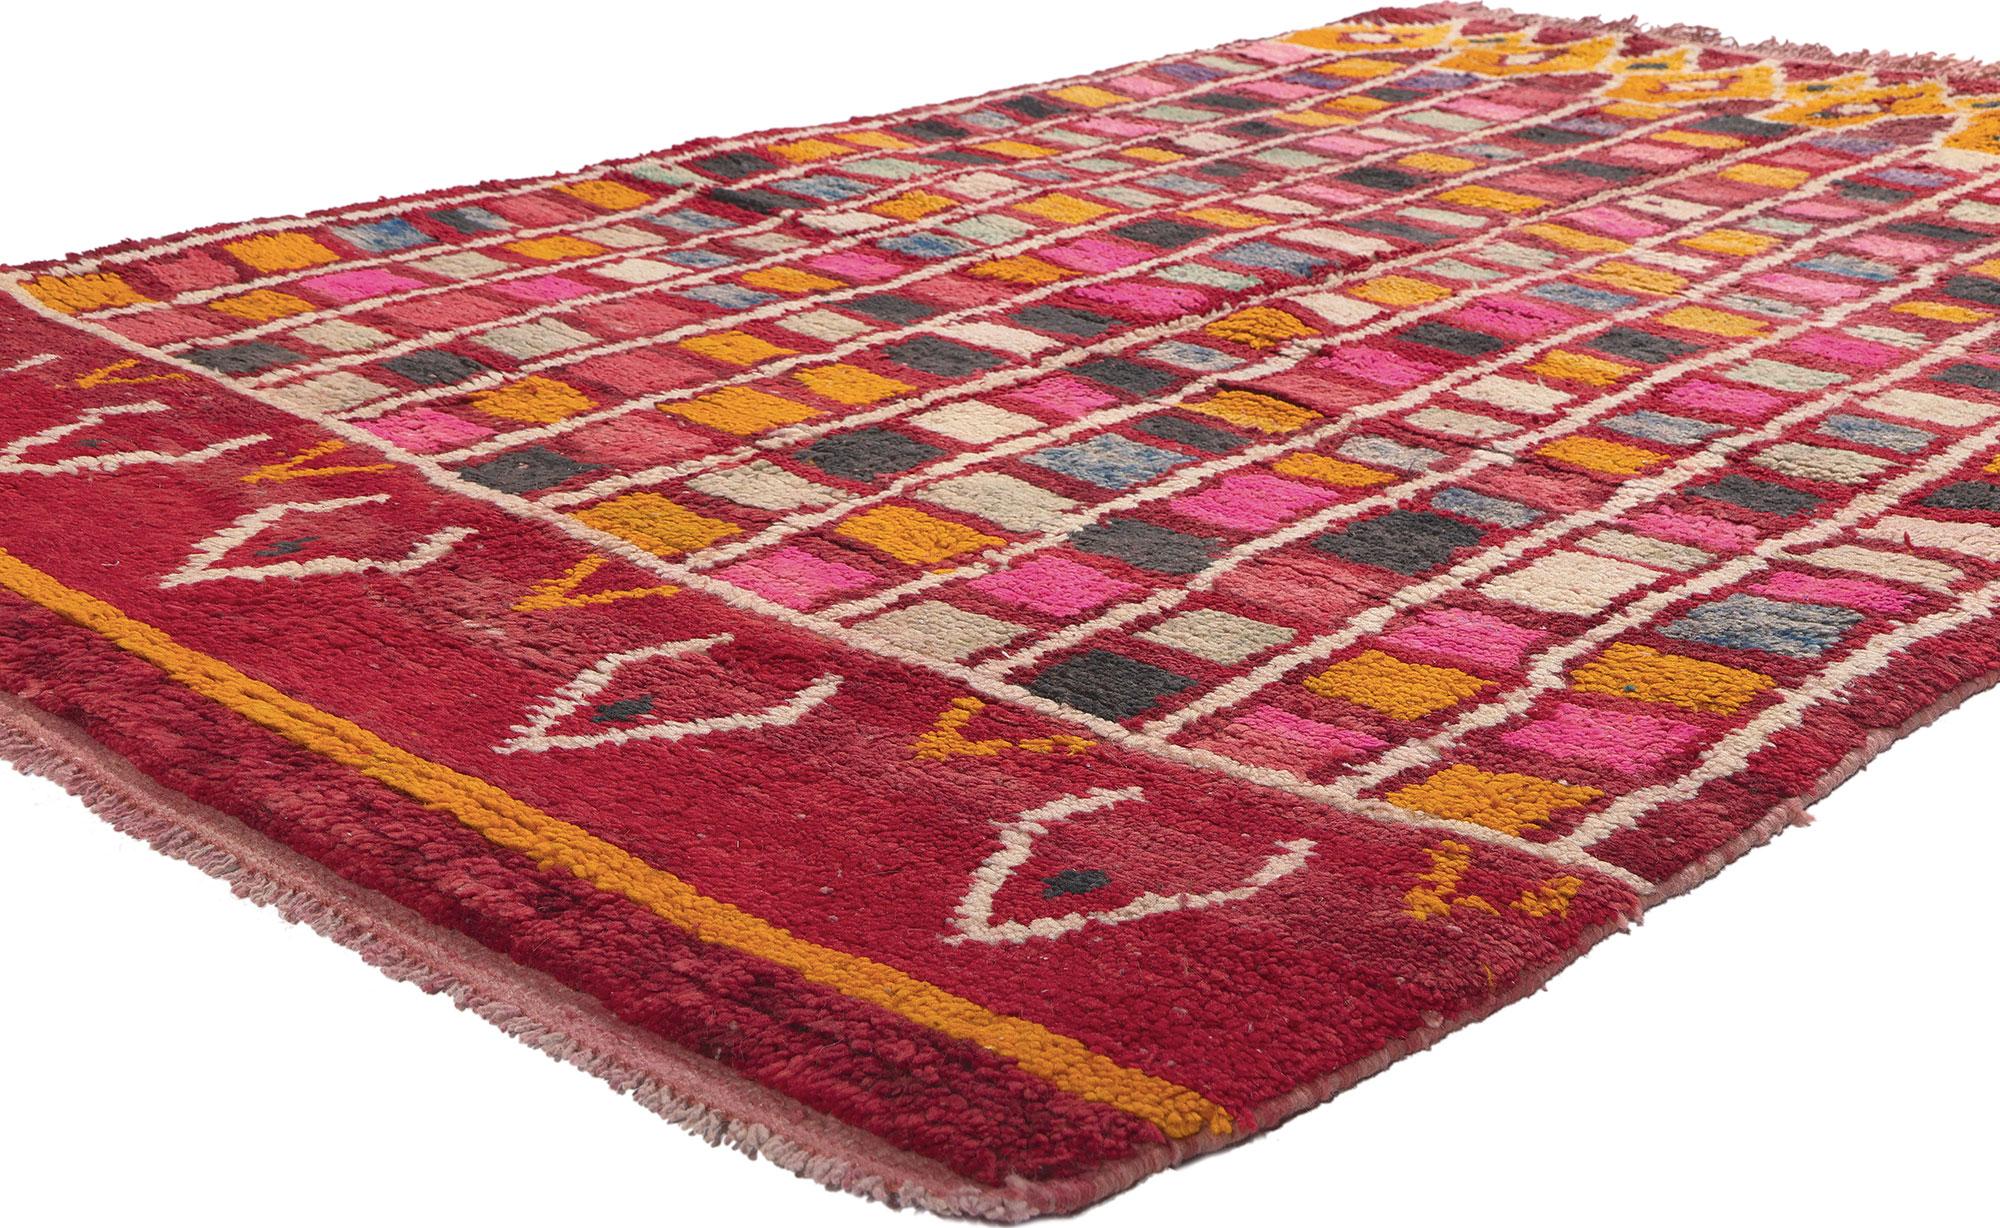 20259 Vintage Rehamna Moroccan Rug, 04'11 x 07'10. From the central plains of Rehamna east of Marrakech emerges a rug that defies expectations with its colorful and unpredictable designs. Embracing an Abstract Cubist style fused with Boho Jungalow